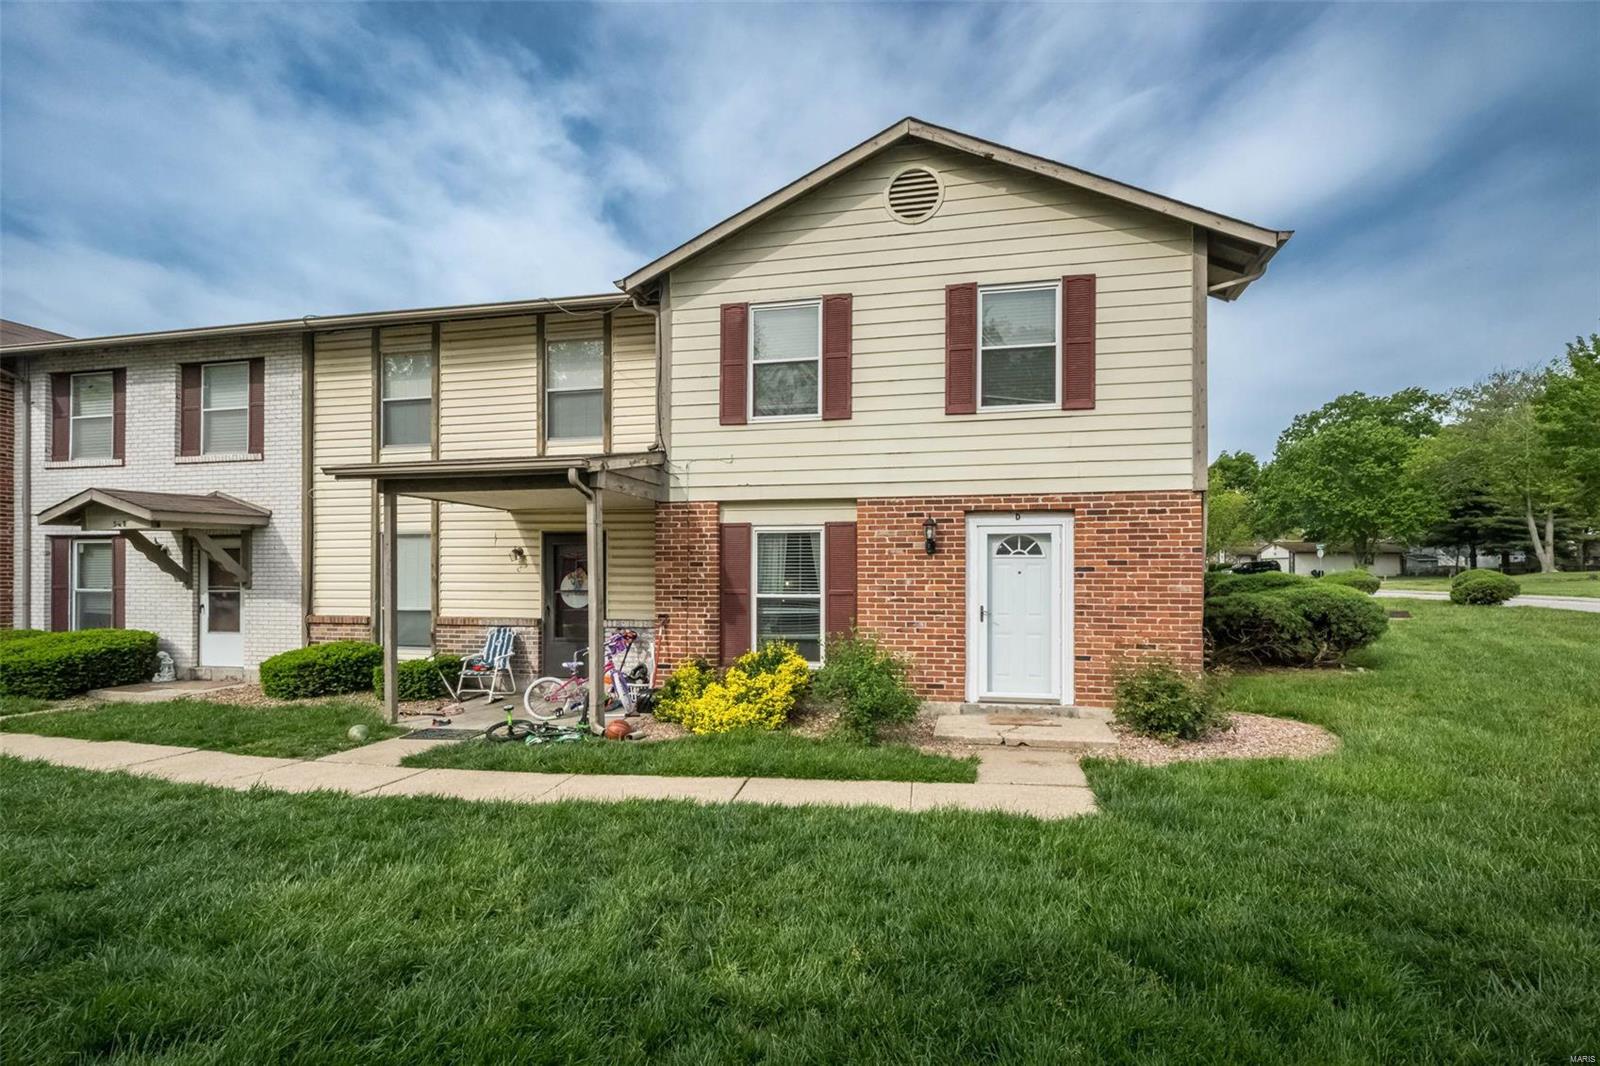 View St Peters, MO 63376 townhome